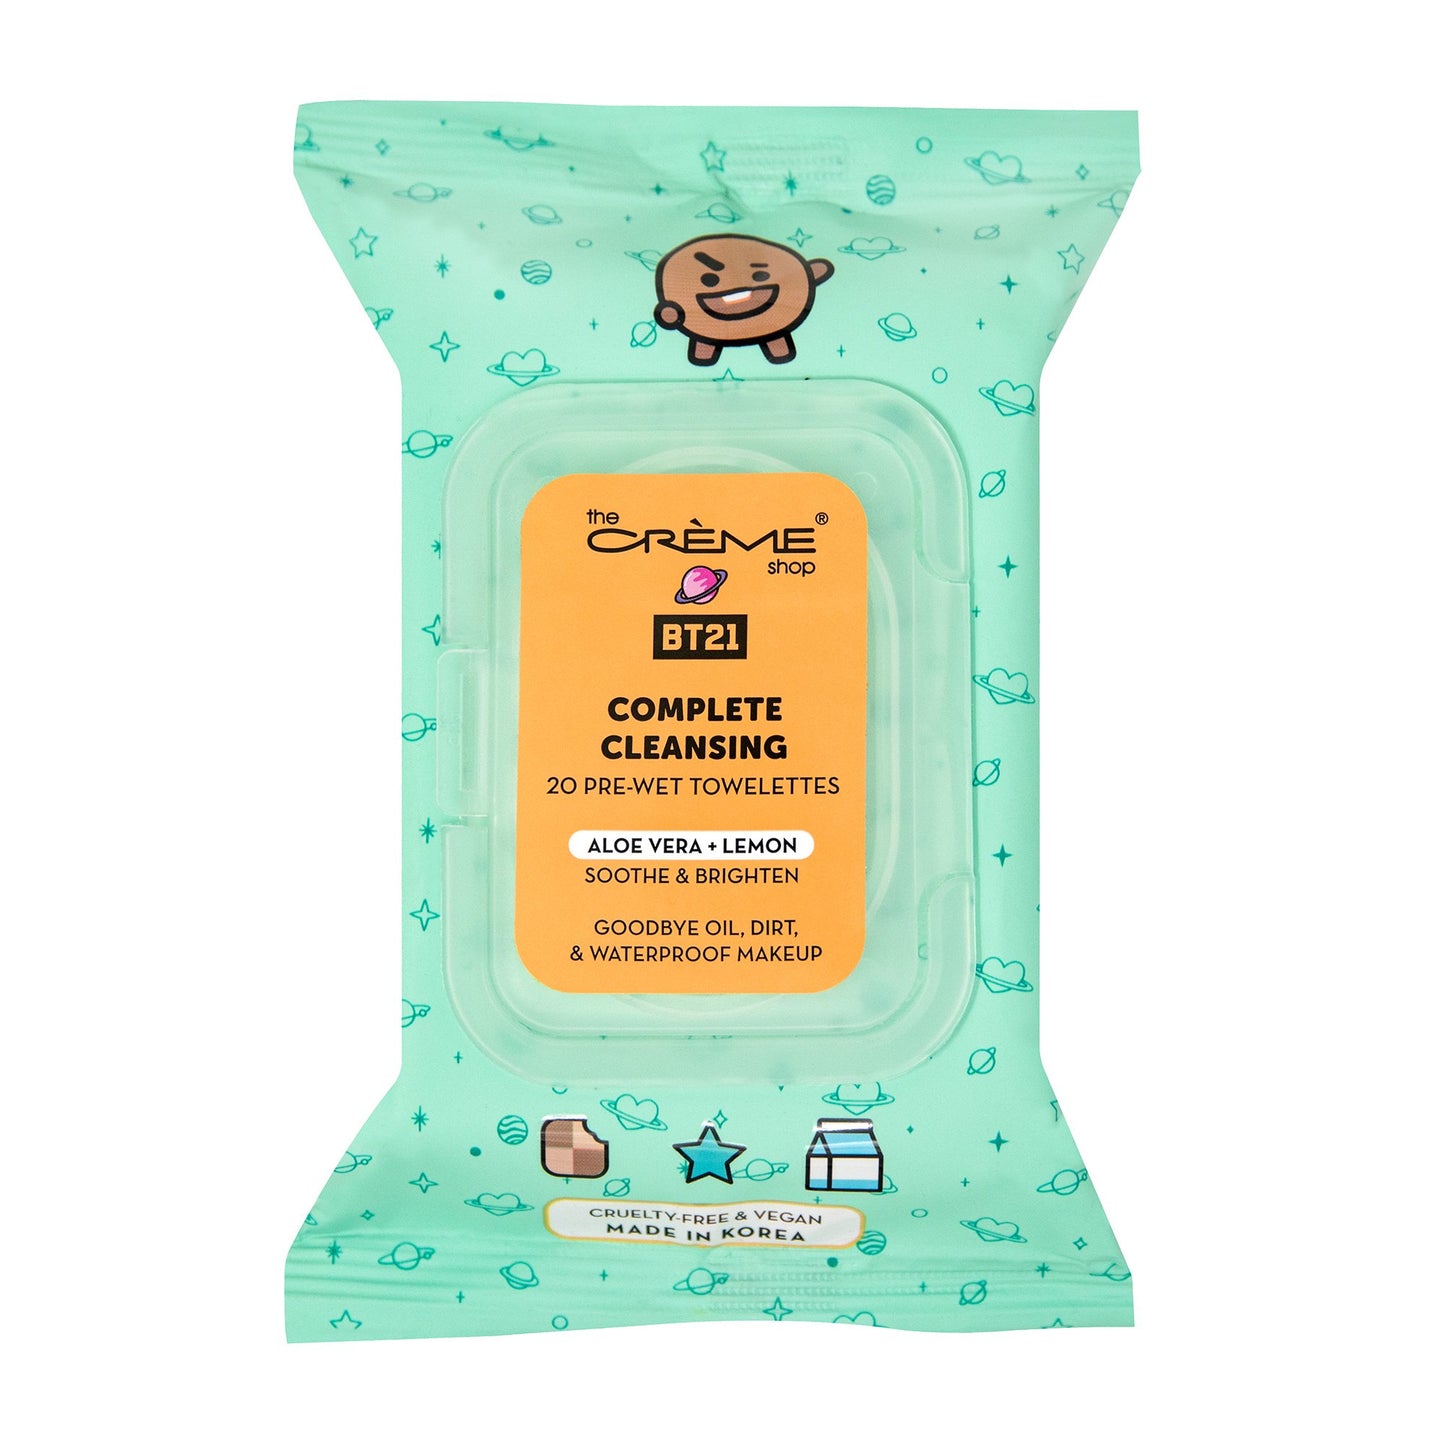 SHOOKY Complete Cleansing Towelettes - Aloe Vera & Lemon (20 Pre-Wet Towelettes) Towelettes The Crème Shop x BT21 